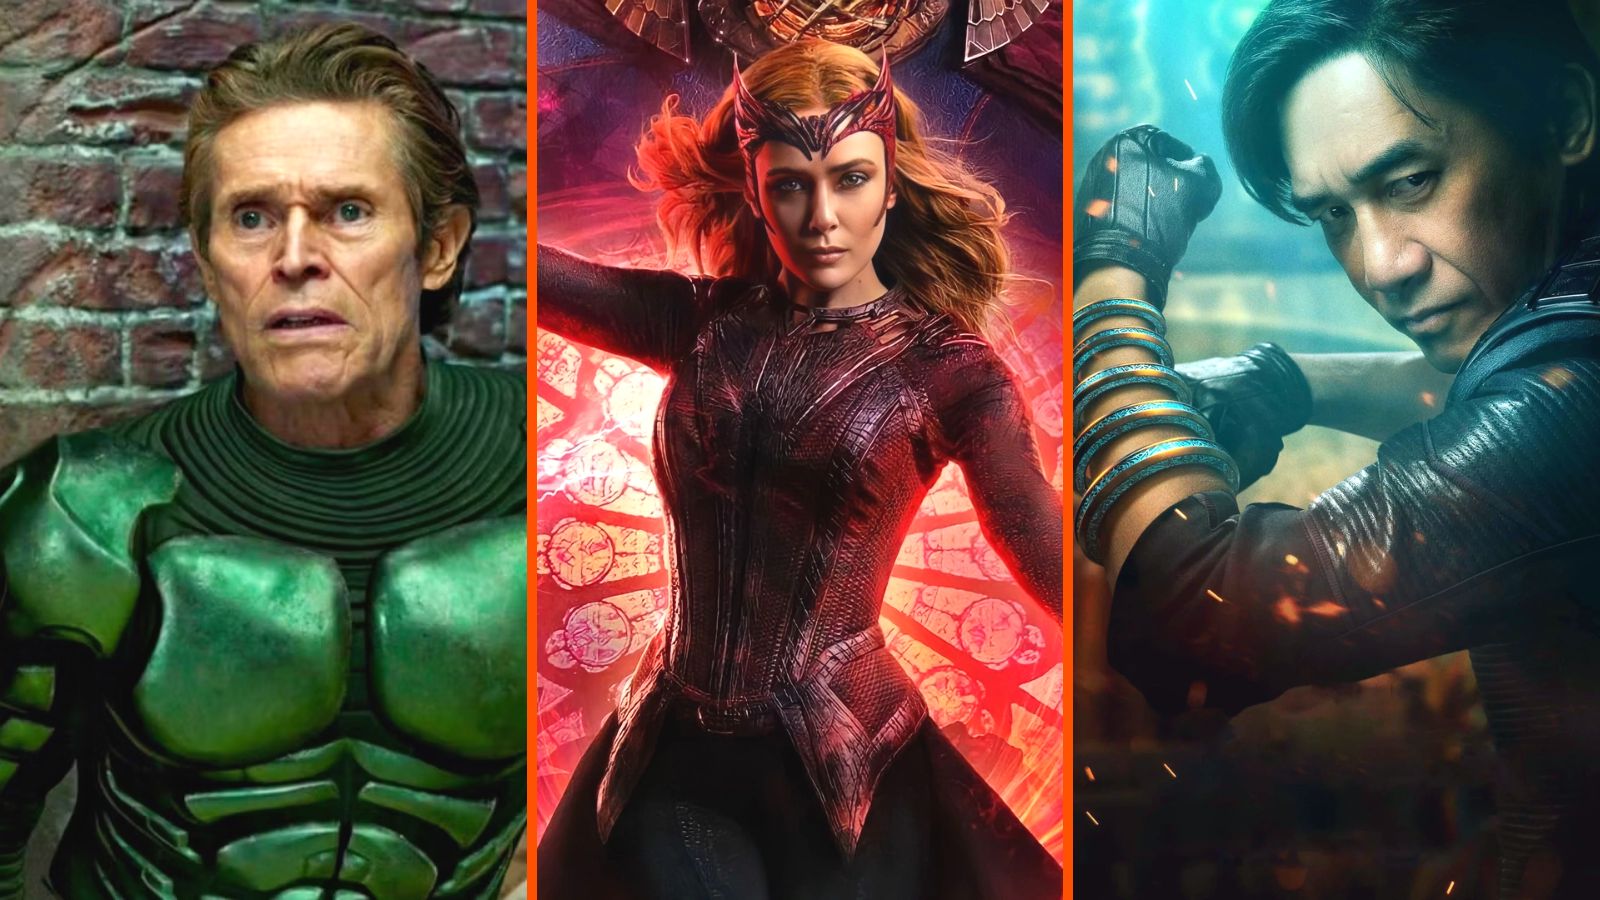 Examining the Darker Side: Marvel Studios’ MCU Takes a Grittier Turn as Its Villains Face Their Fate